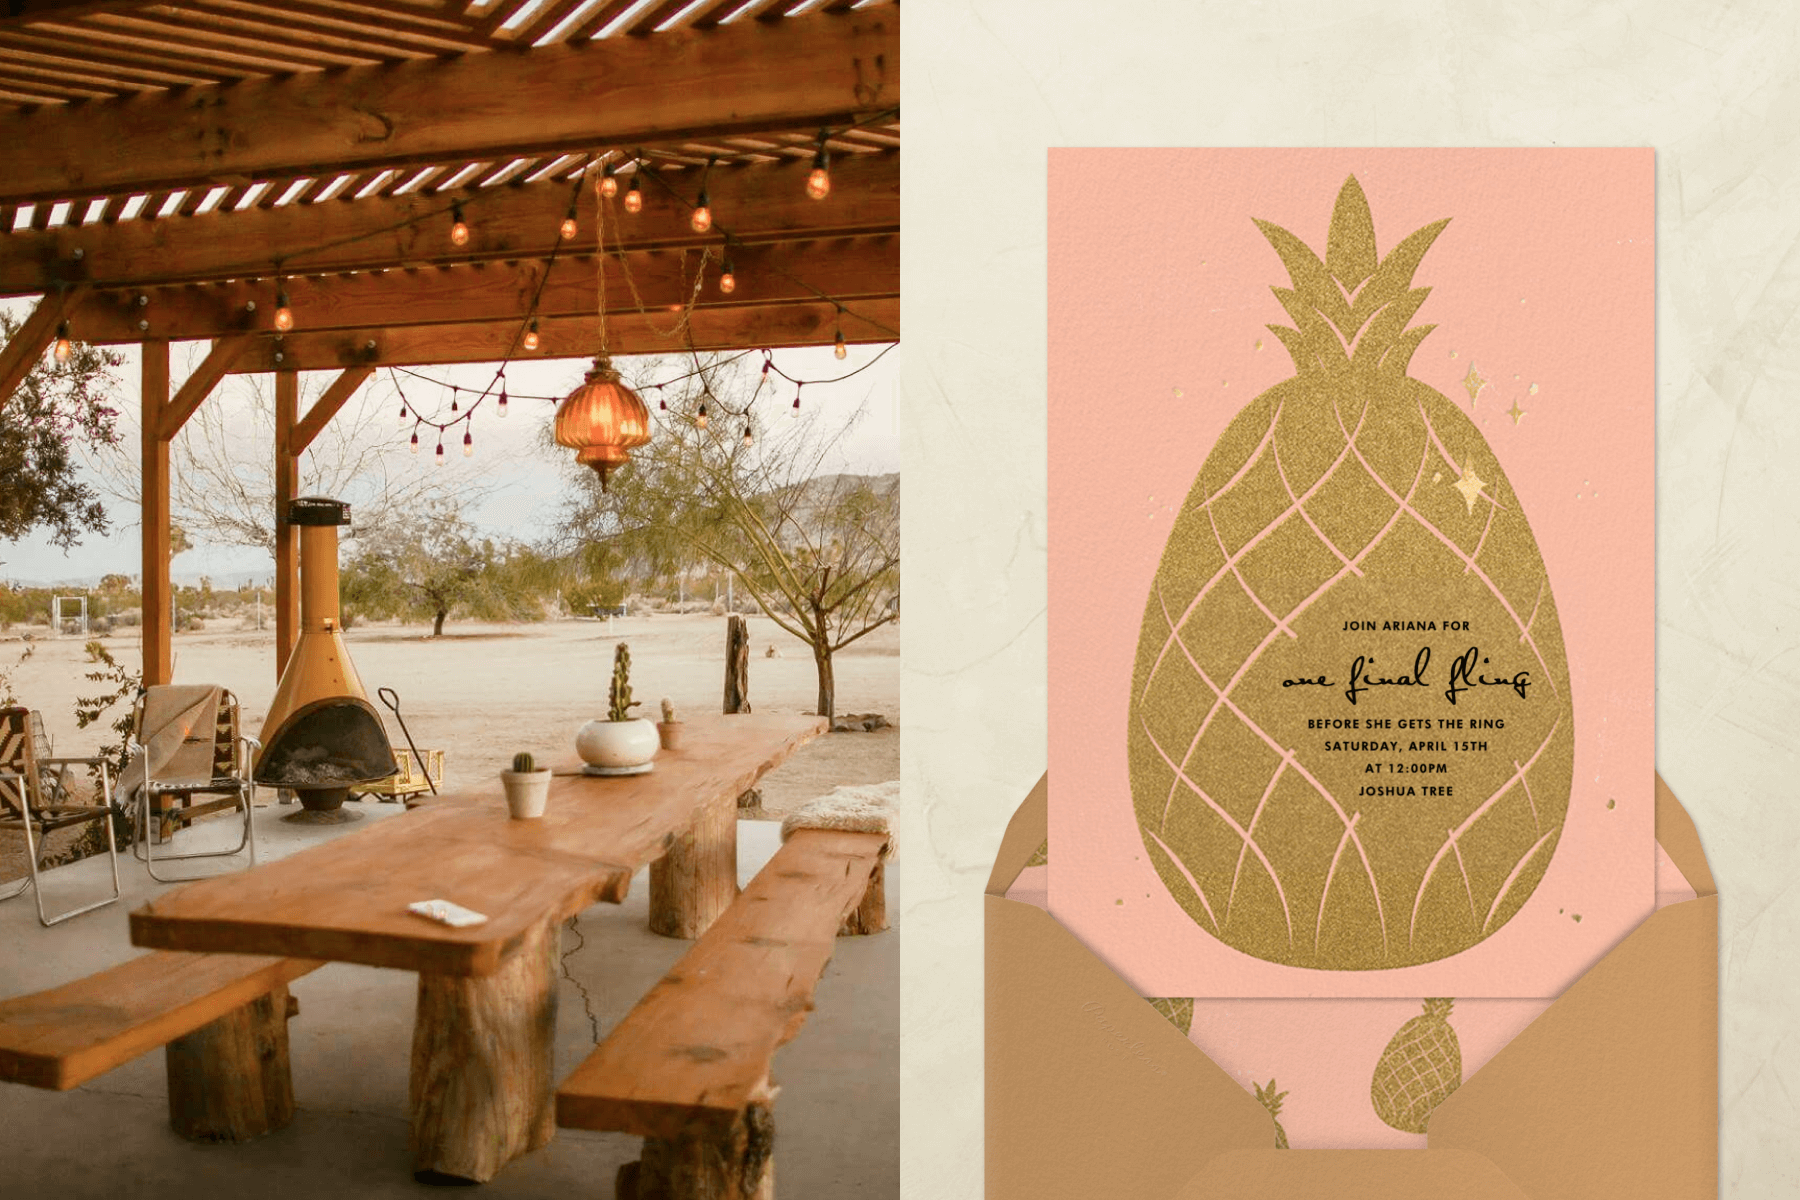 left: A rustic live edge picnic table under a wood pergola with string lights in a desert setting. Right: A bachelorette party invitation with a golden pineapple and pink background.